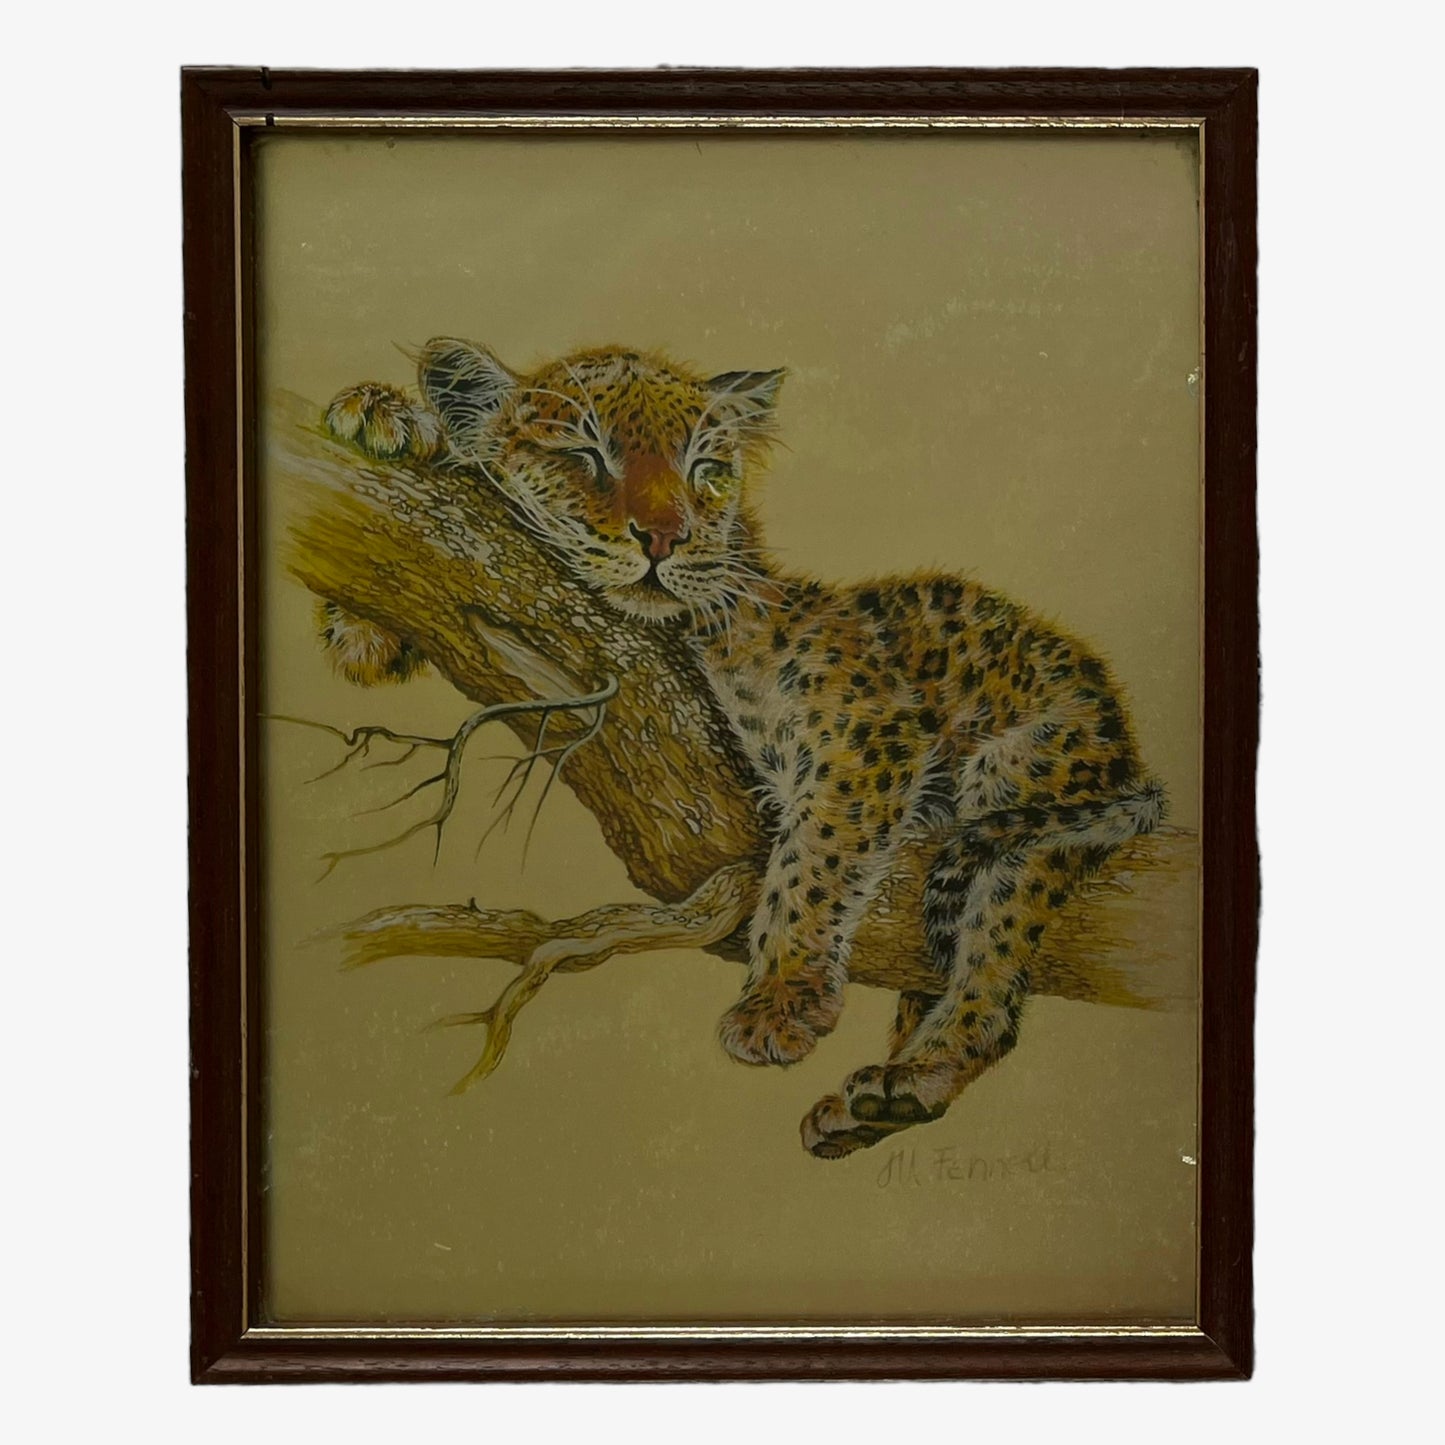 Vintage 80s Framed Leopard Cub Foil Art Etching By M. Fennell - Casspios Dream